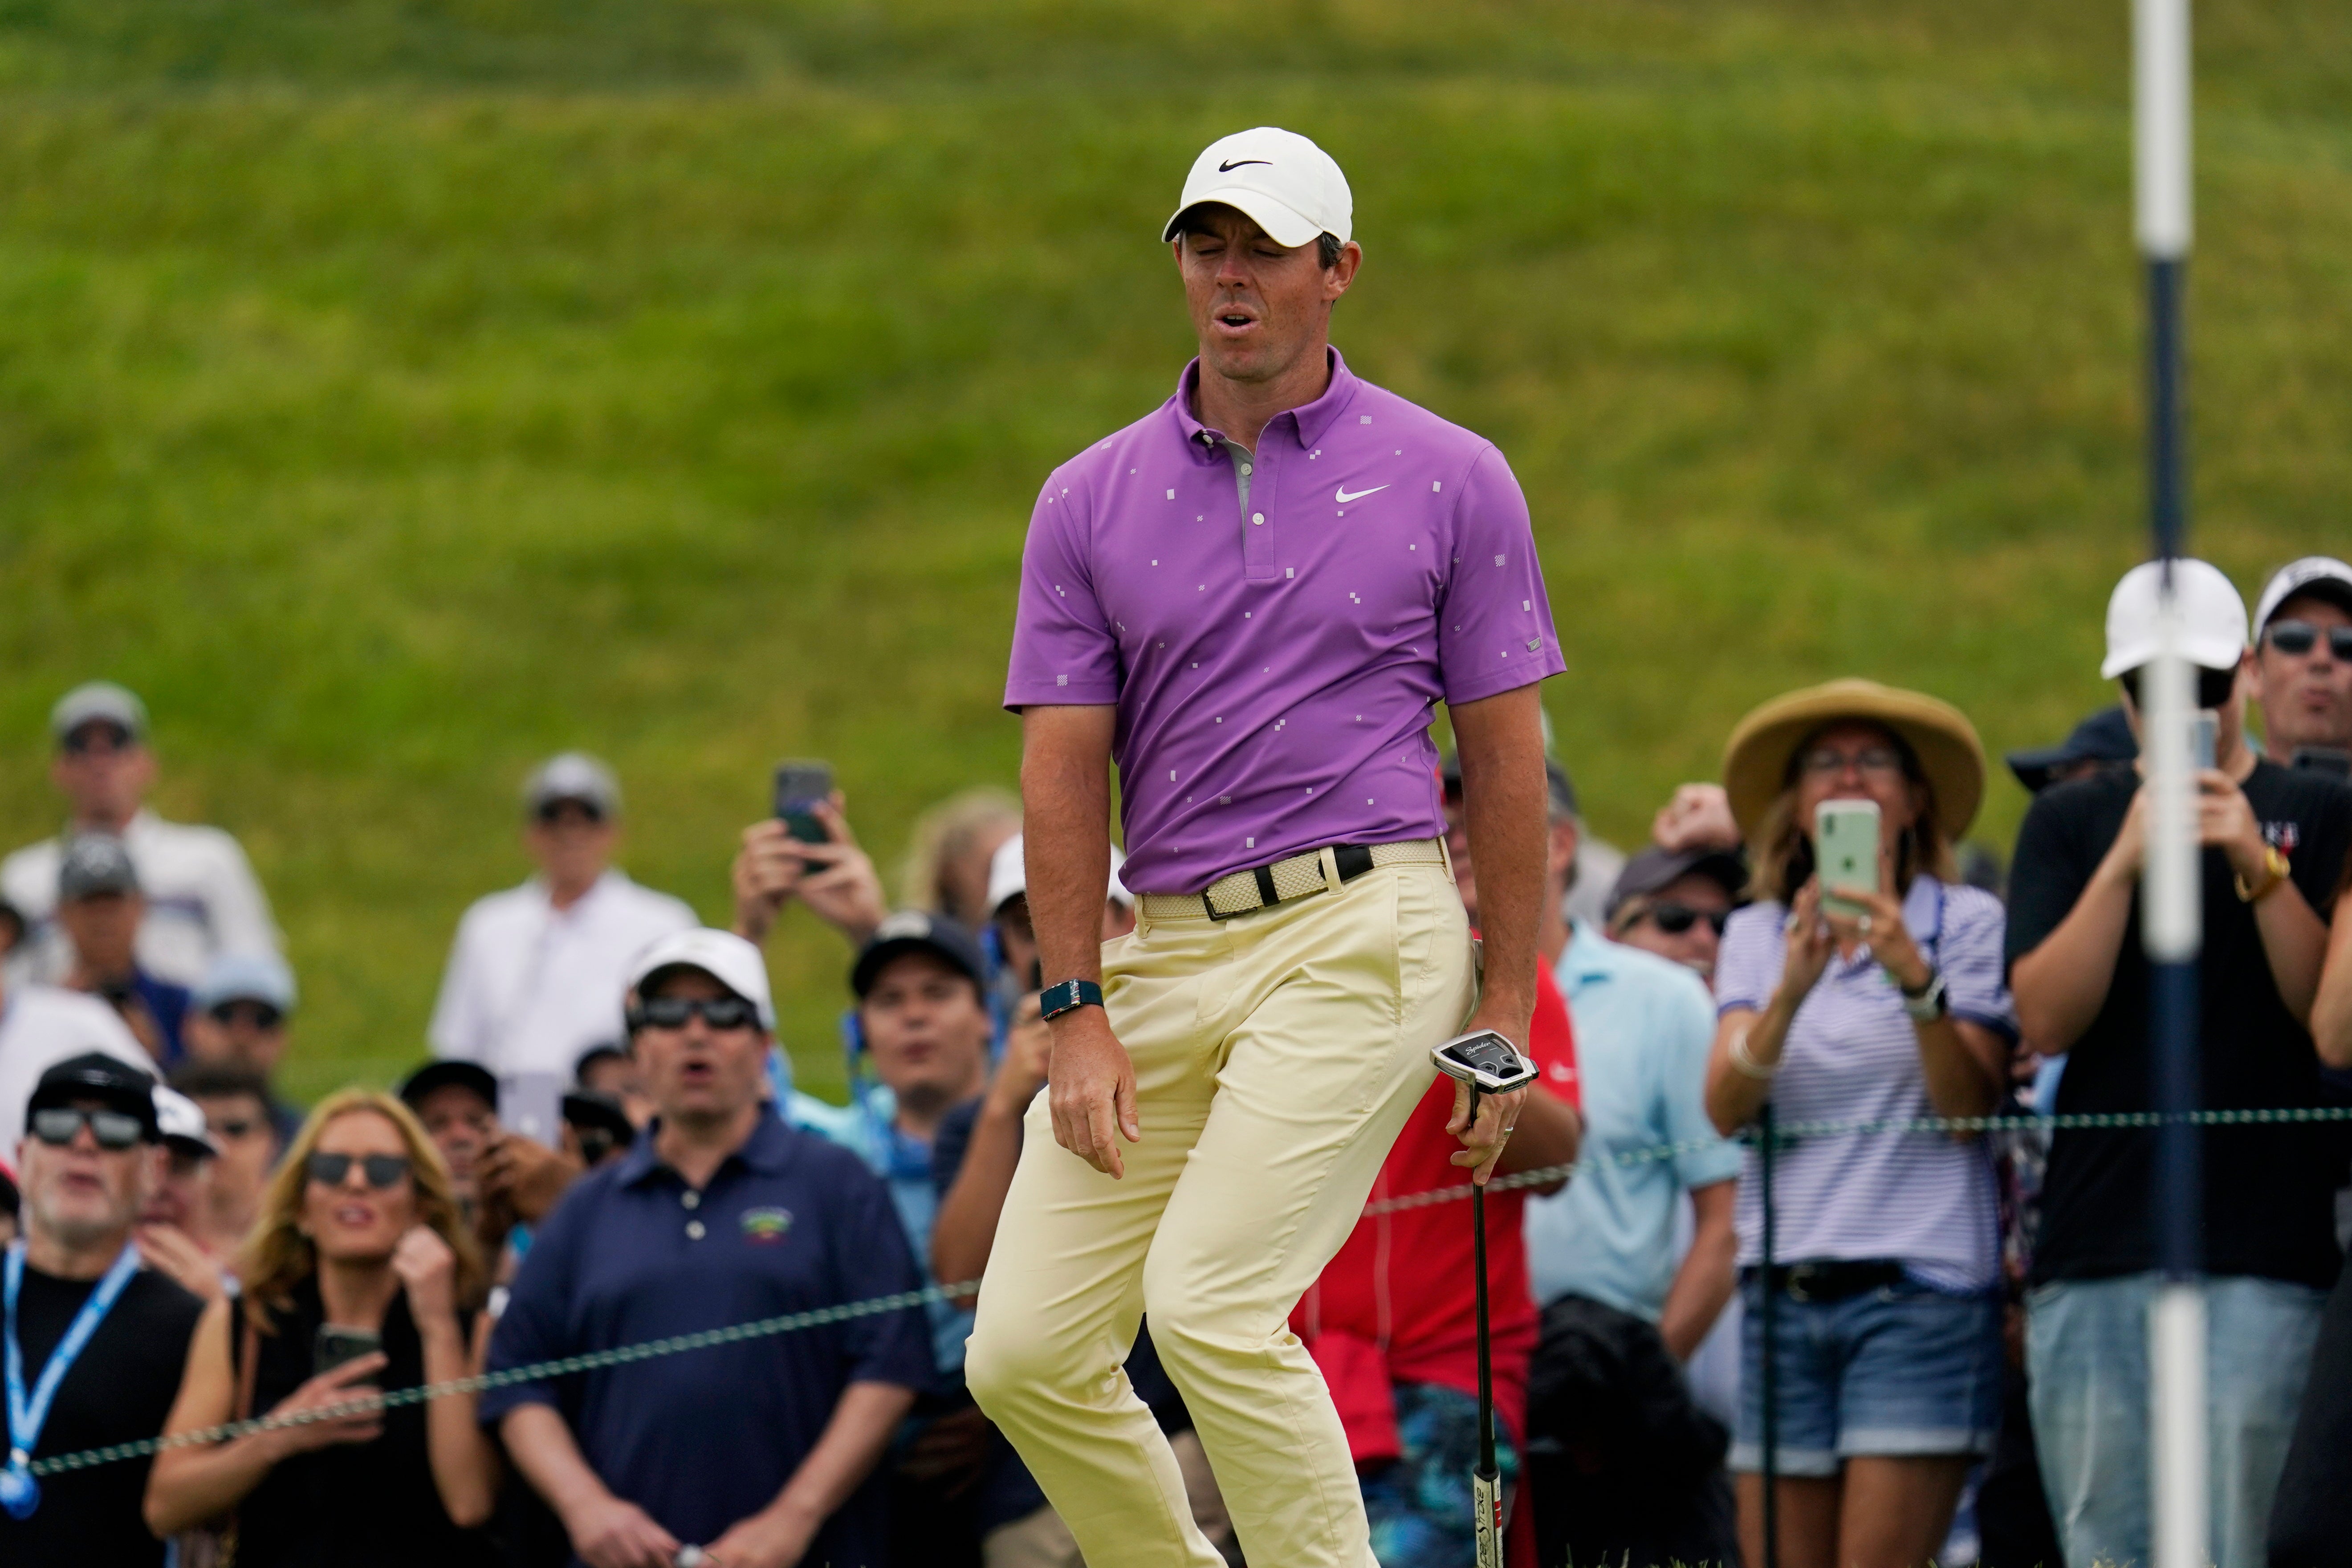 Rory McIlroy reacts after missing a putt on the fifth green during the final round of the US Open